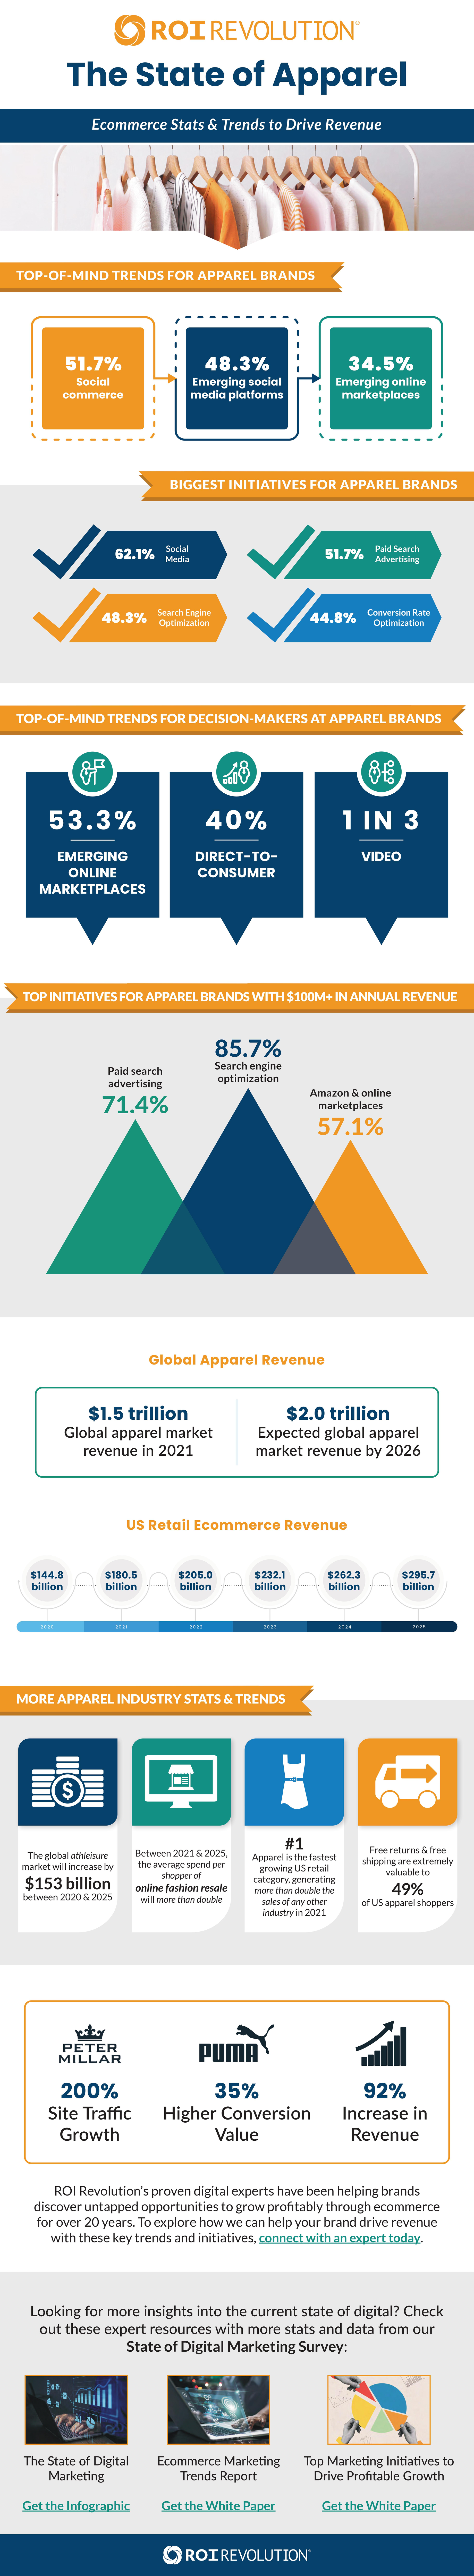 Infographic: State of the Apparel Industry